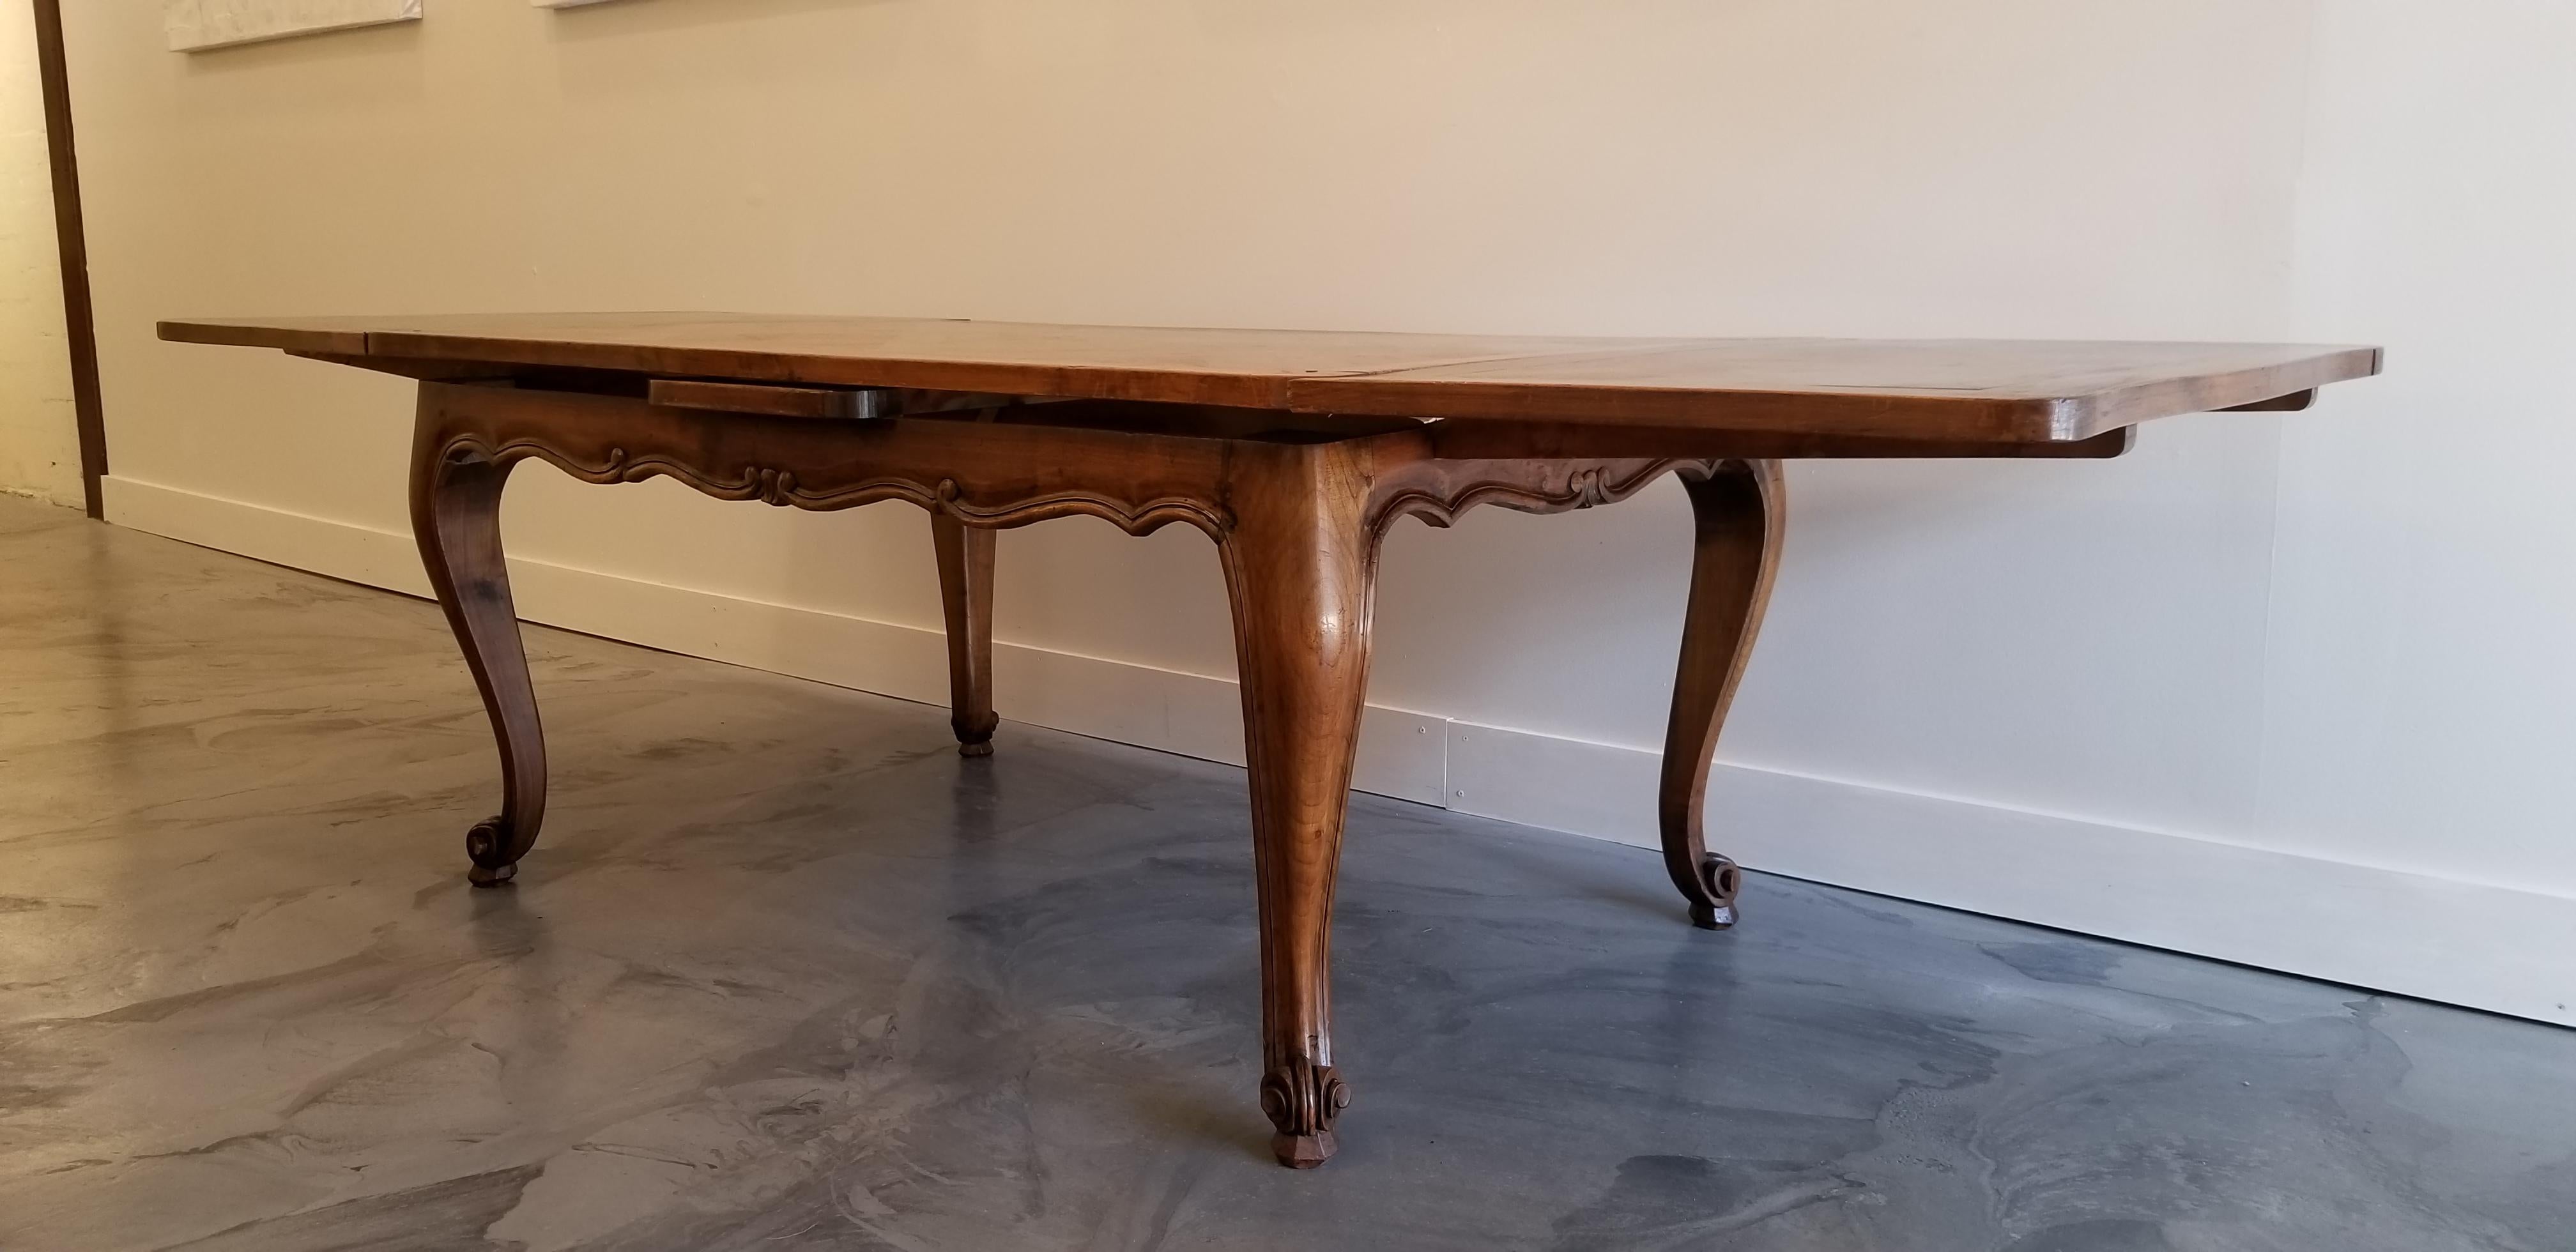 Early 20th Century French Provincial Draw-Leaf Dining Table For Sale 2